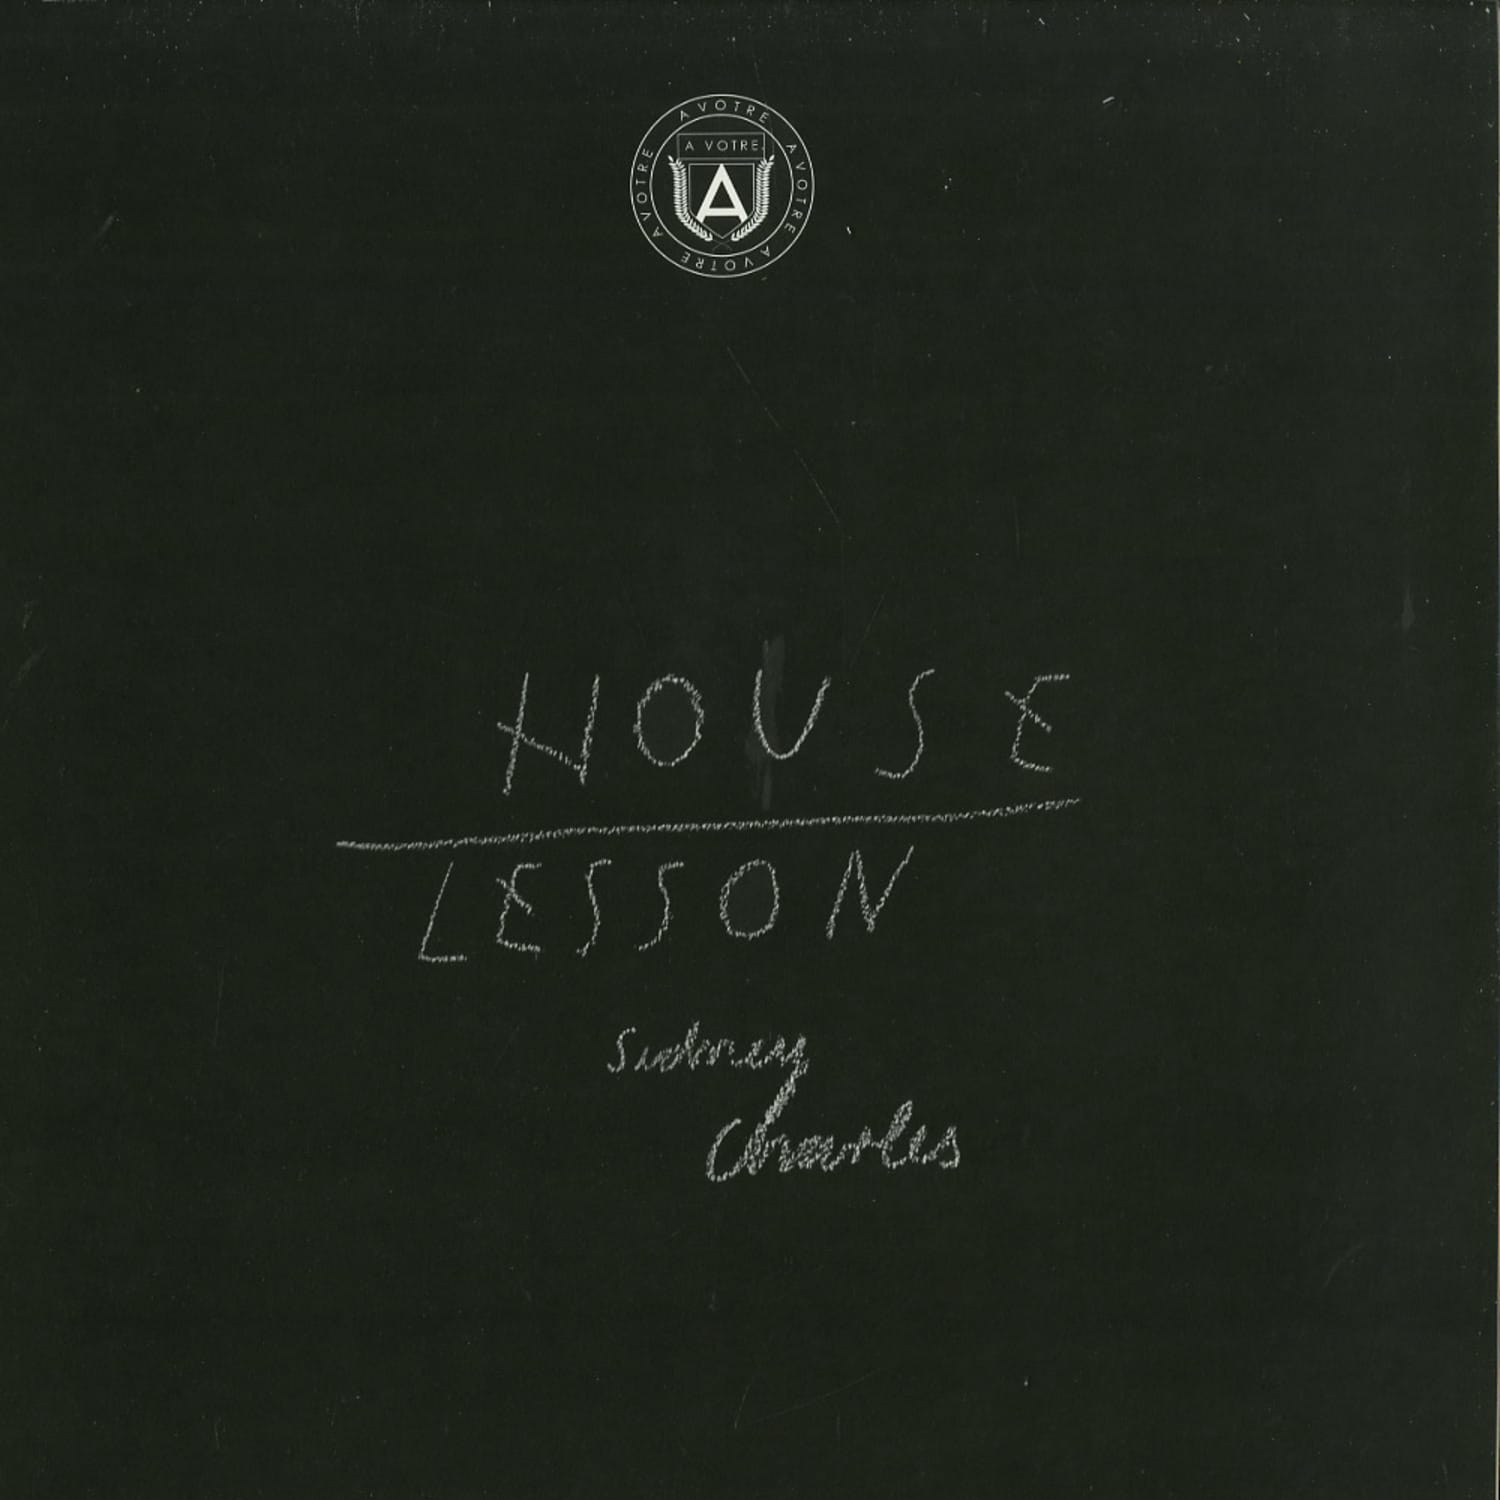 SIDNEY CHARLES - HOUSE LESSON EP 